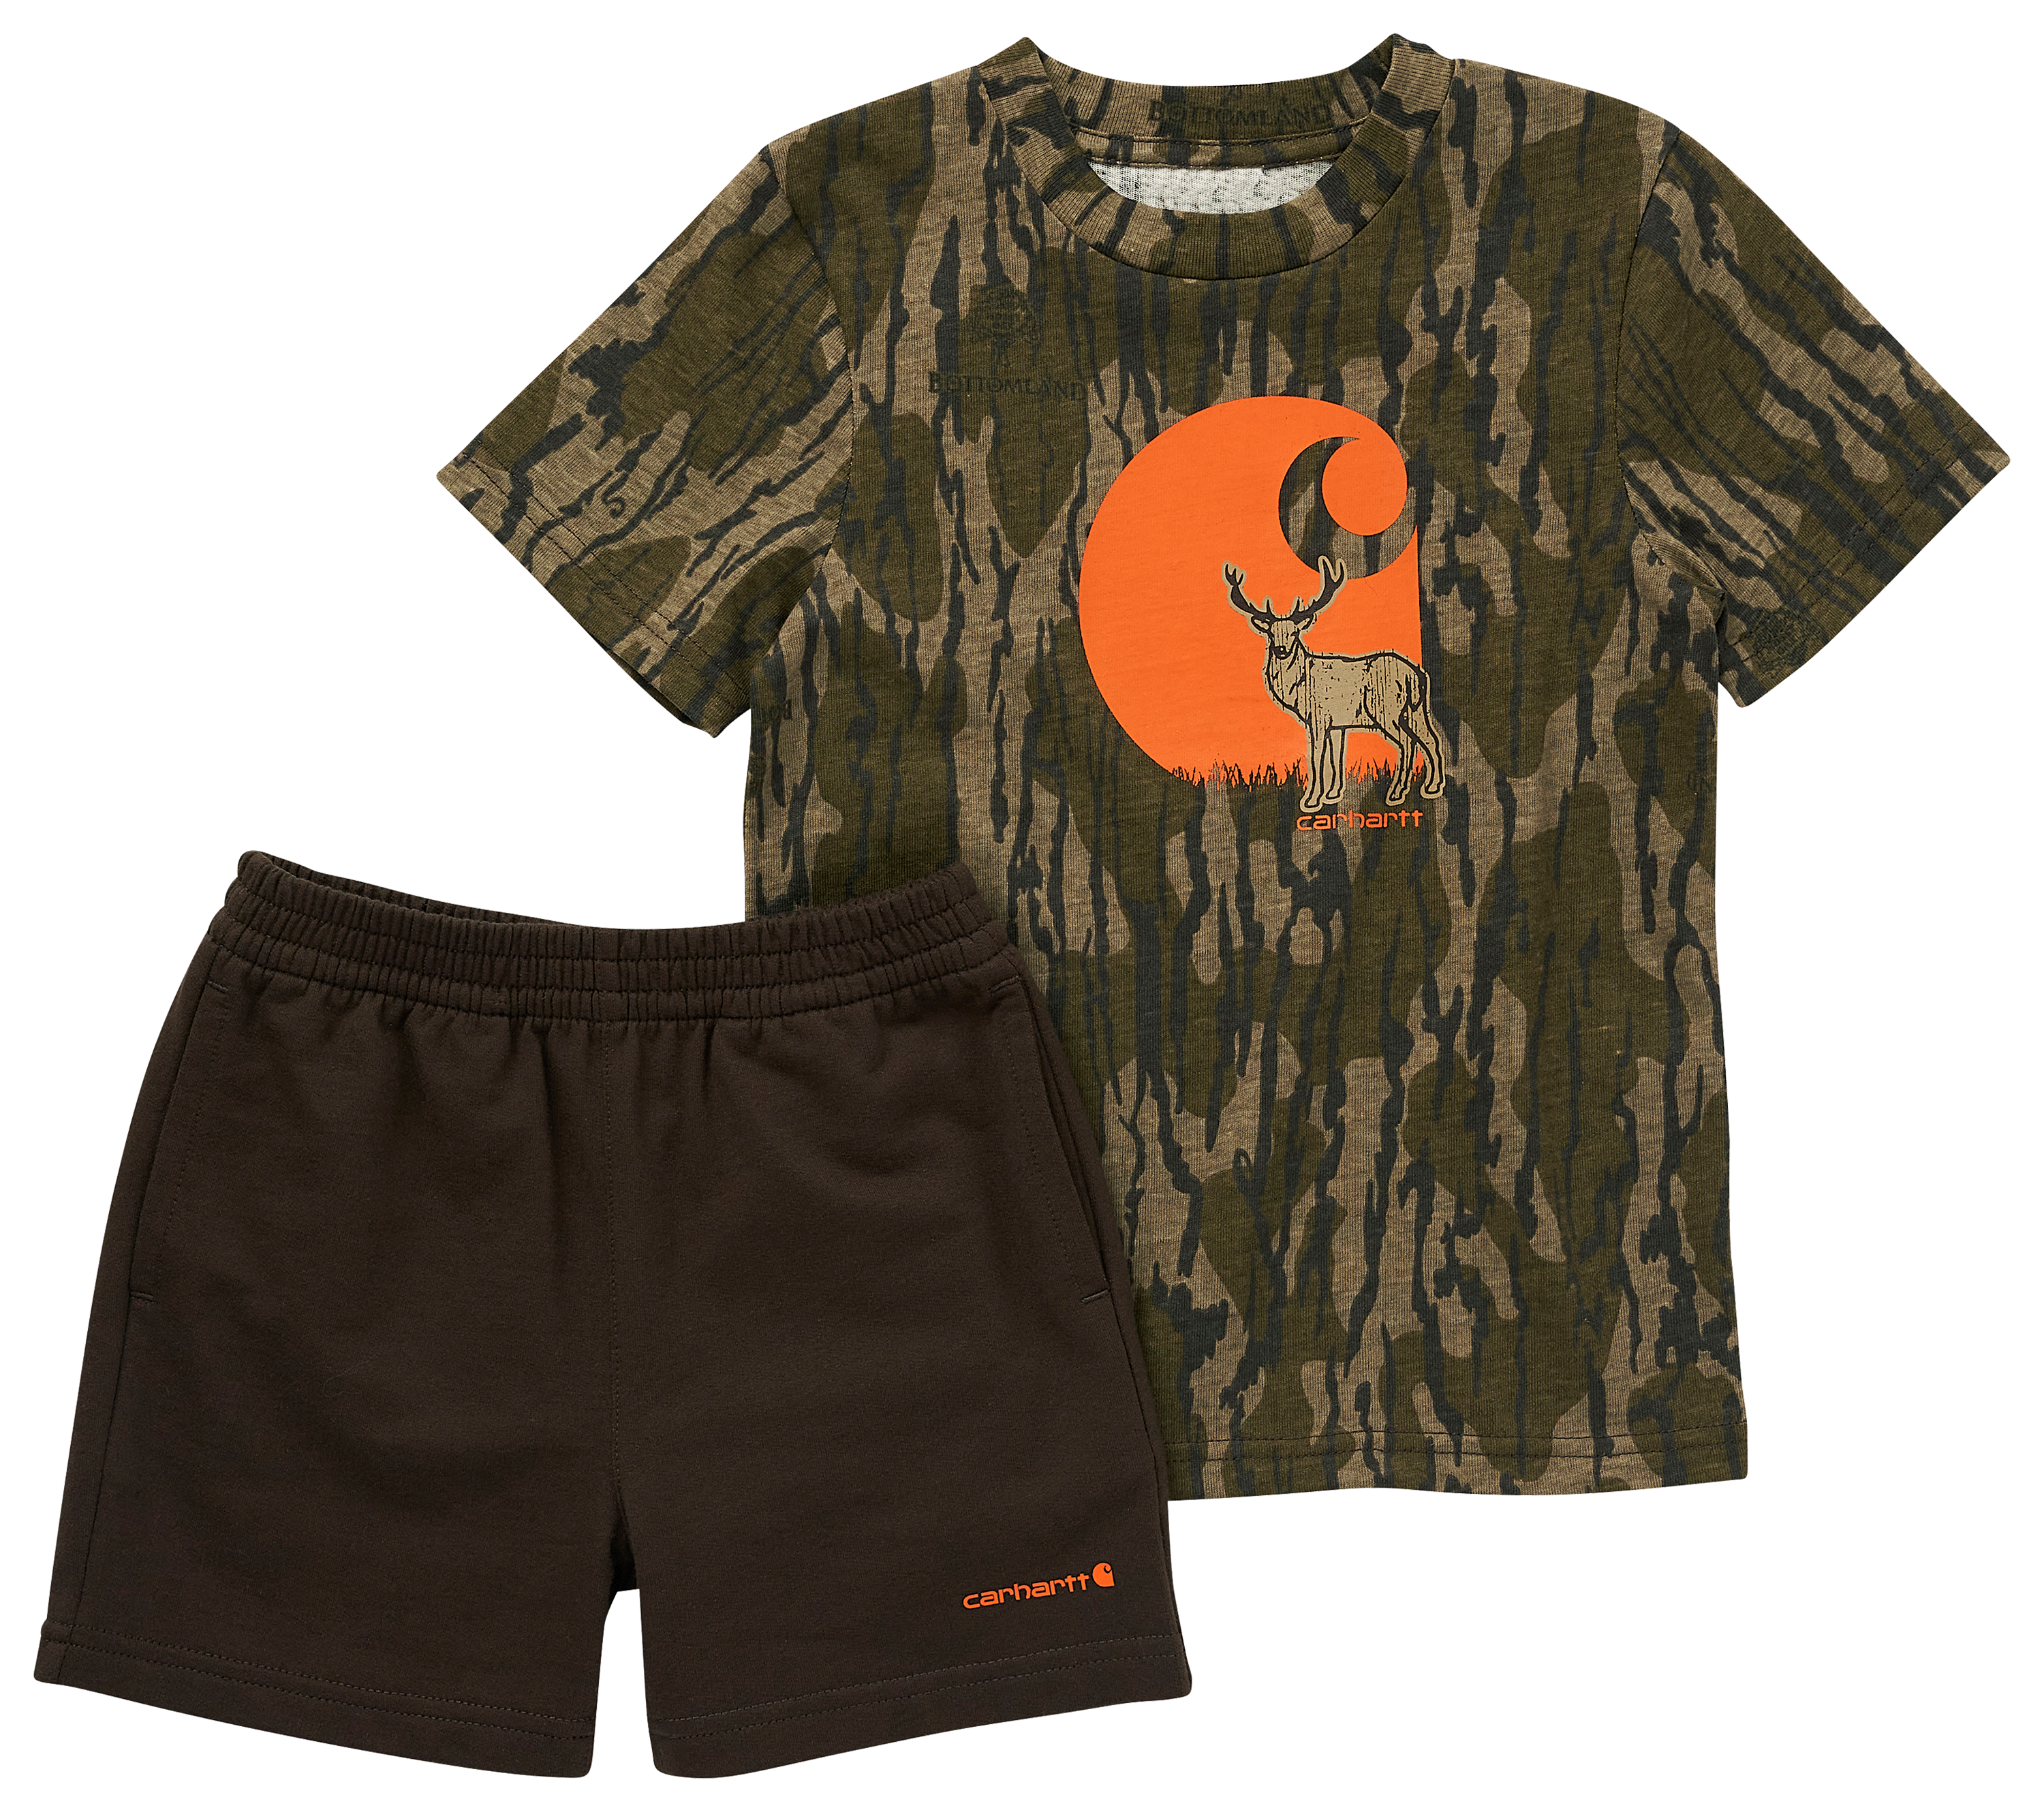 Carhartt Short-Sleeve T-Shirt and French Terry Shorts Set for Toddlers - Mossy Oak Original Bottomland - 2T